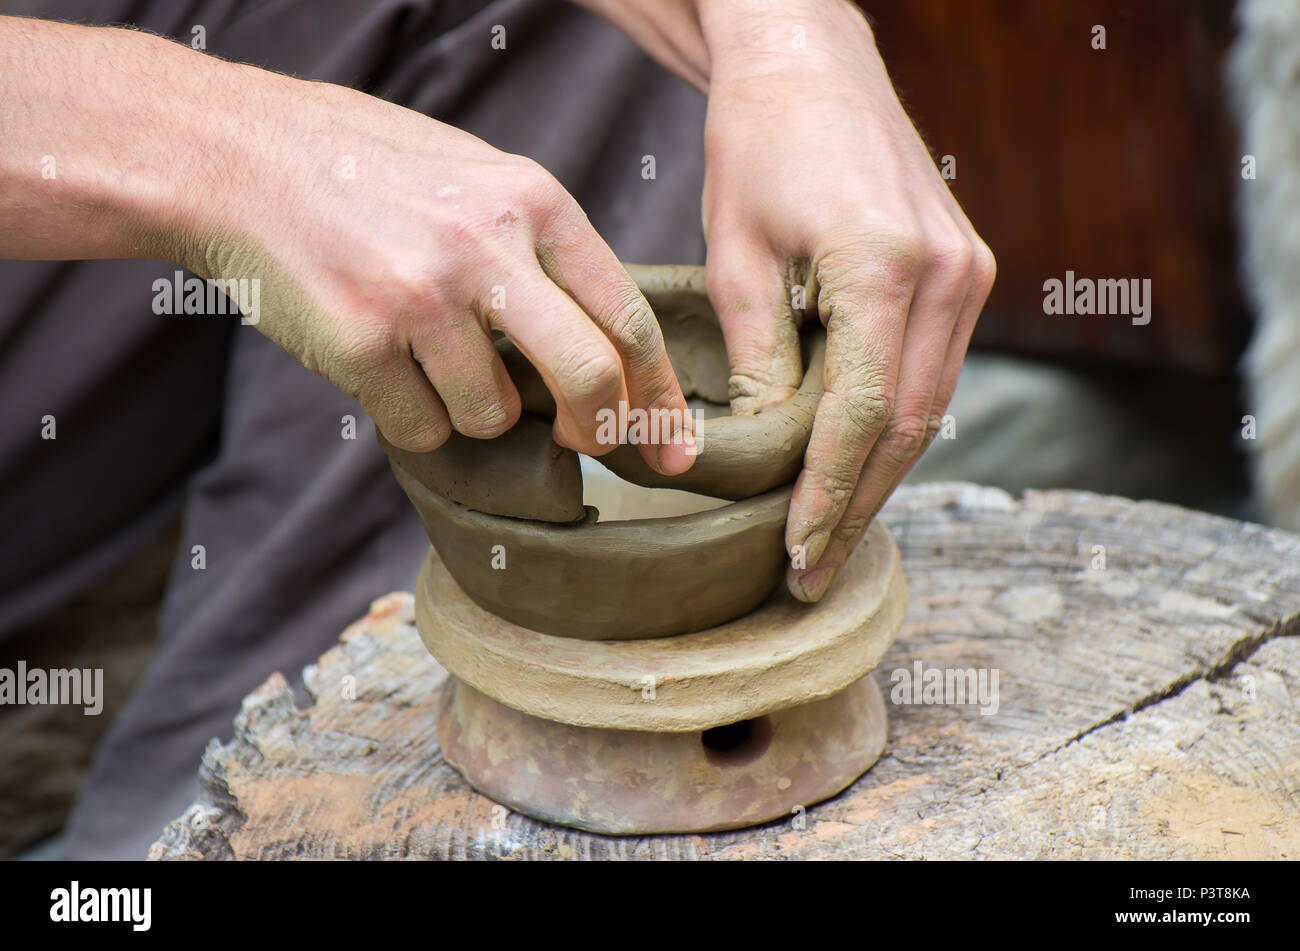 Creating a jar or vase of white clay close-up. Stock Photo